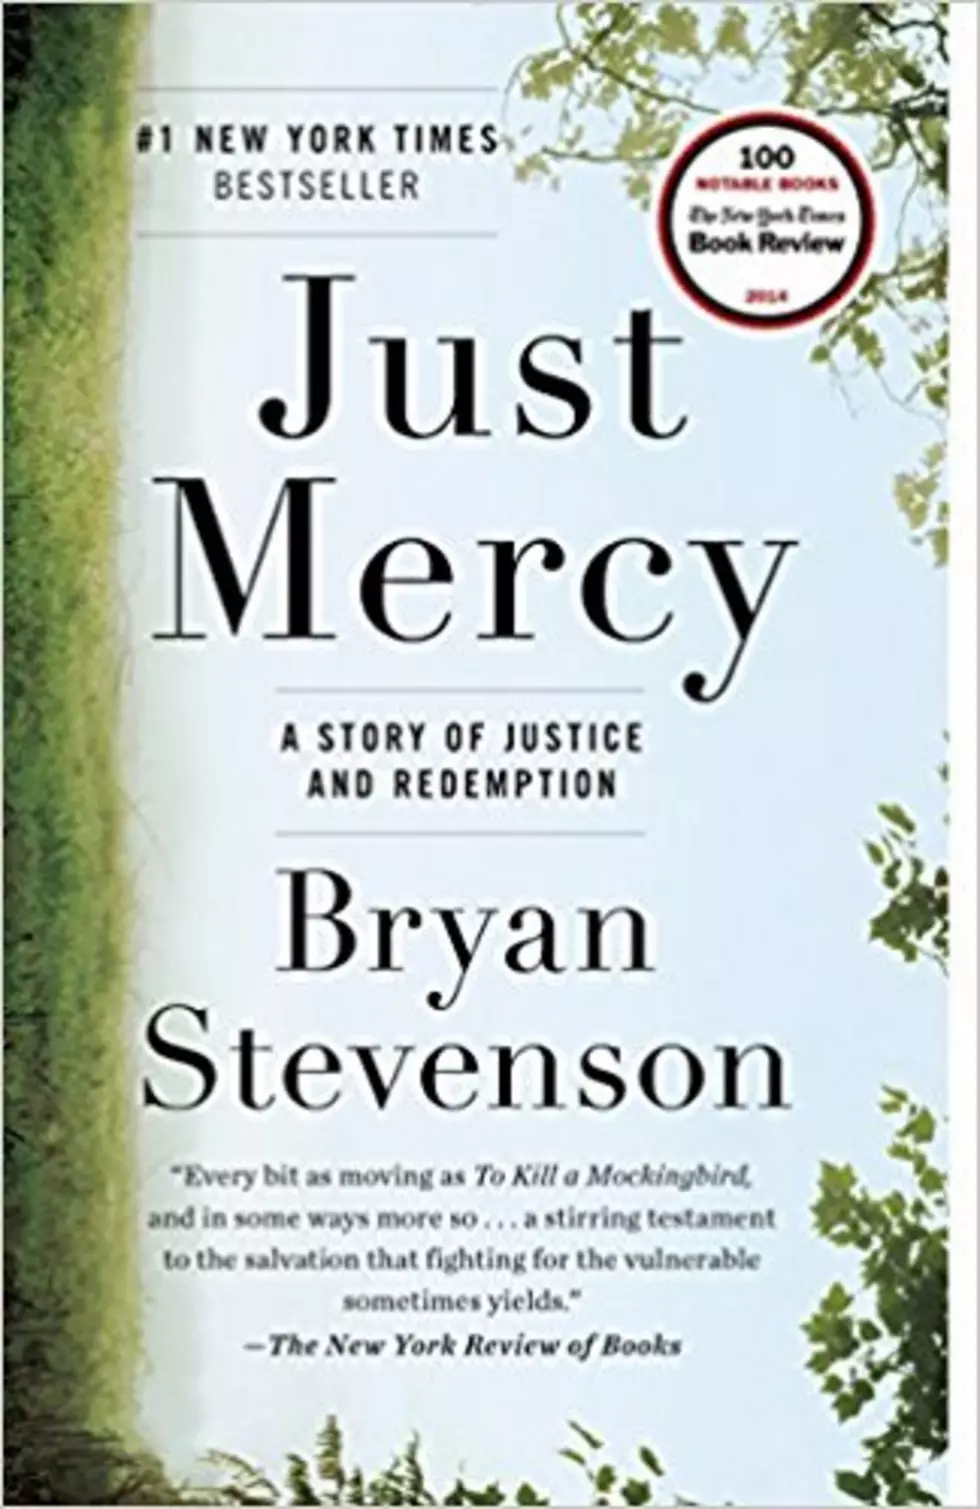 SUNY Oneonta And Huntington Memorial Library To Feature Author Bryan Stevenson